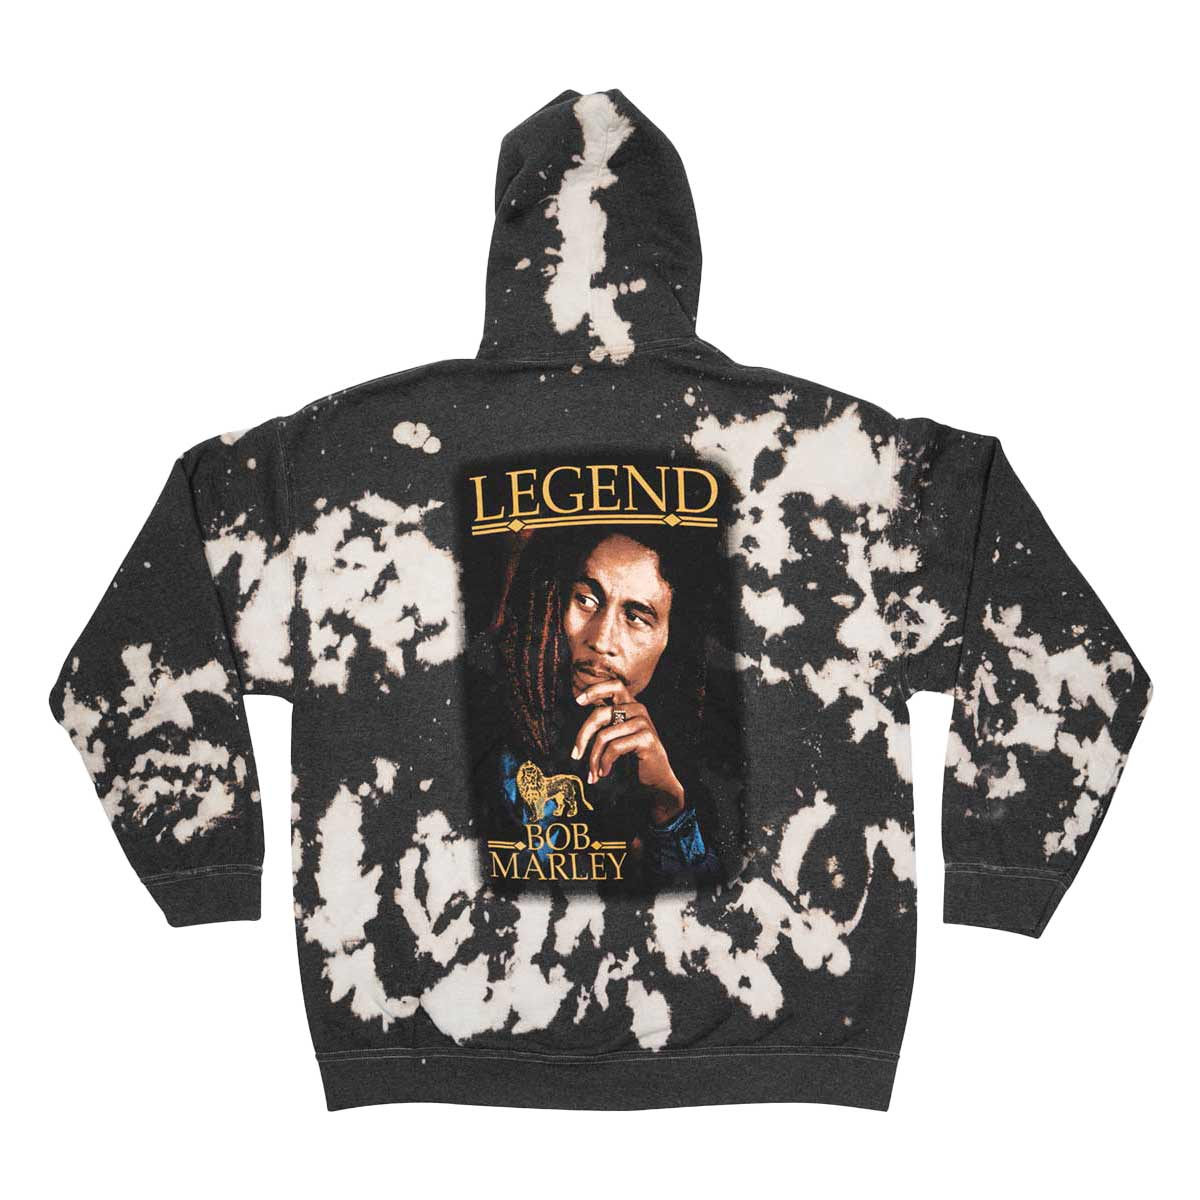 Bob Marley Adult Fit Hoodie with Bleach Effect Design image number 9